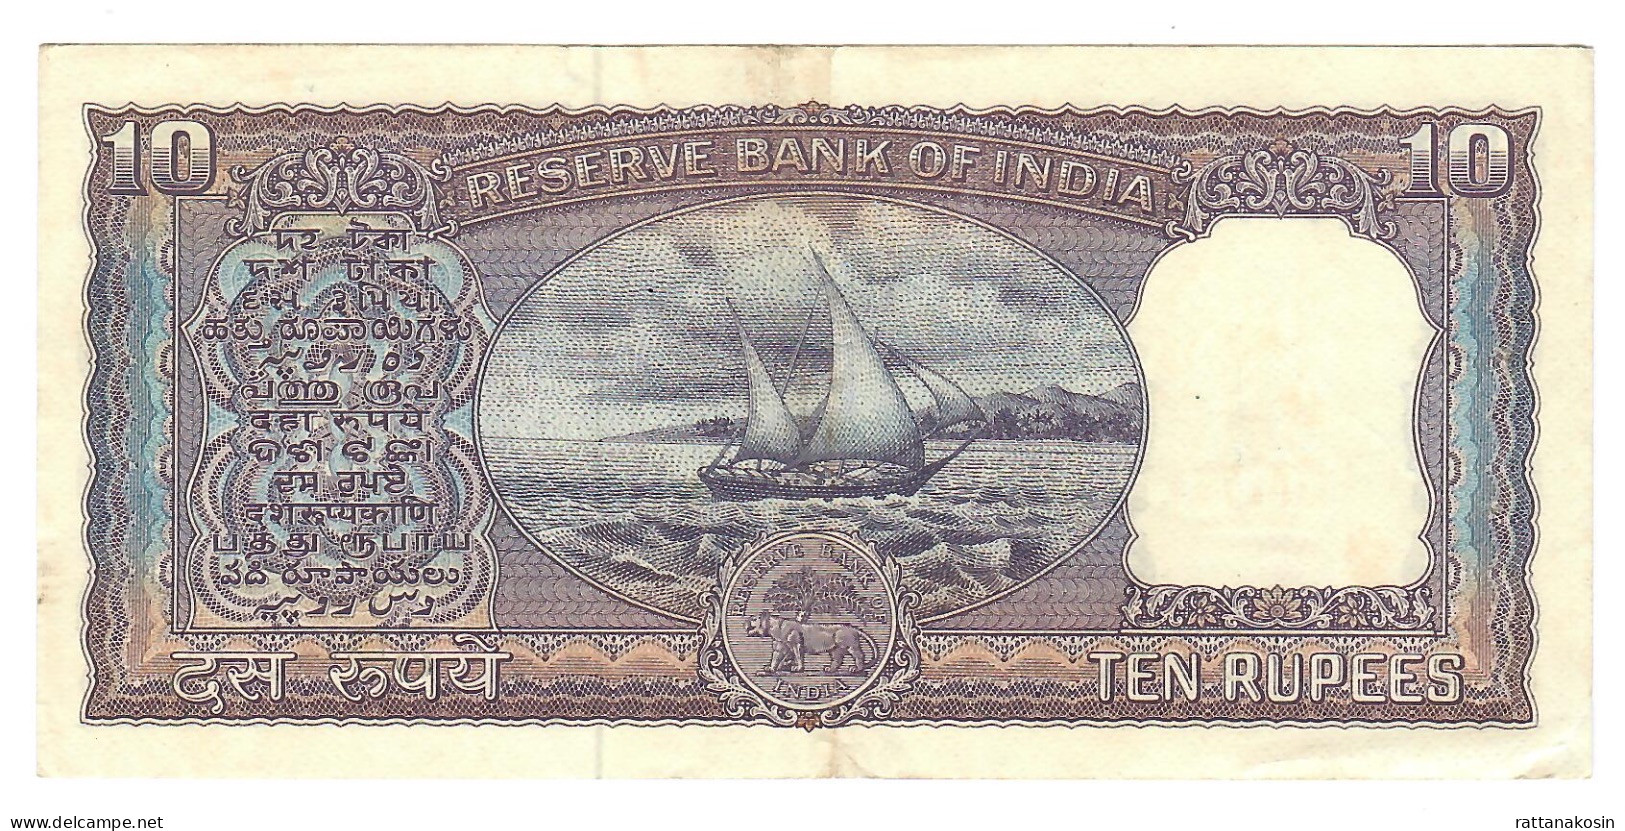 INDIA P57a  10 RUPEES 1967  Signature JHA    XF 2 Usual P.h. - Inde